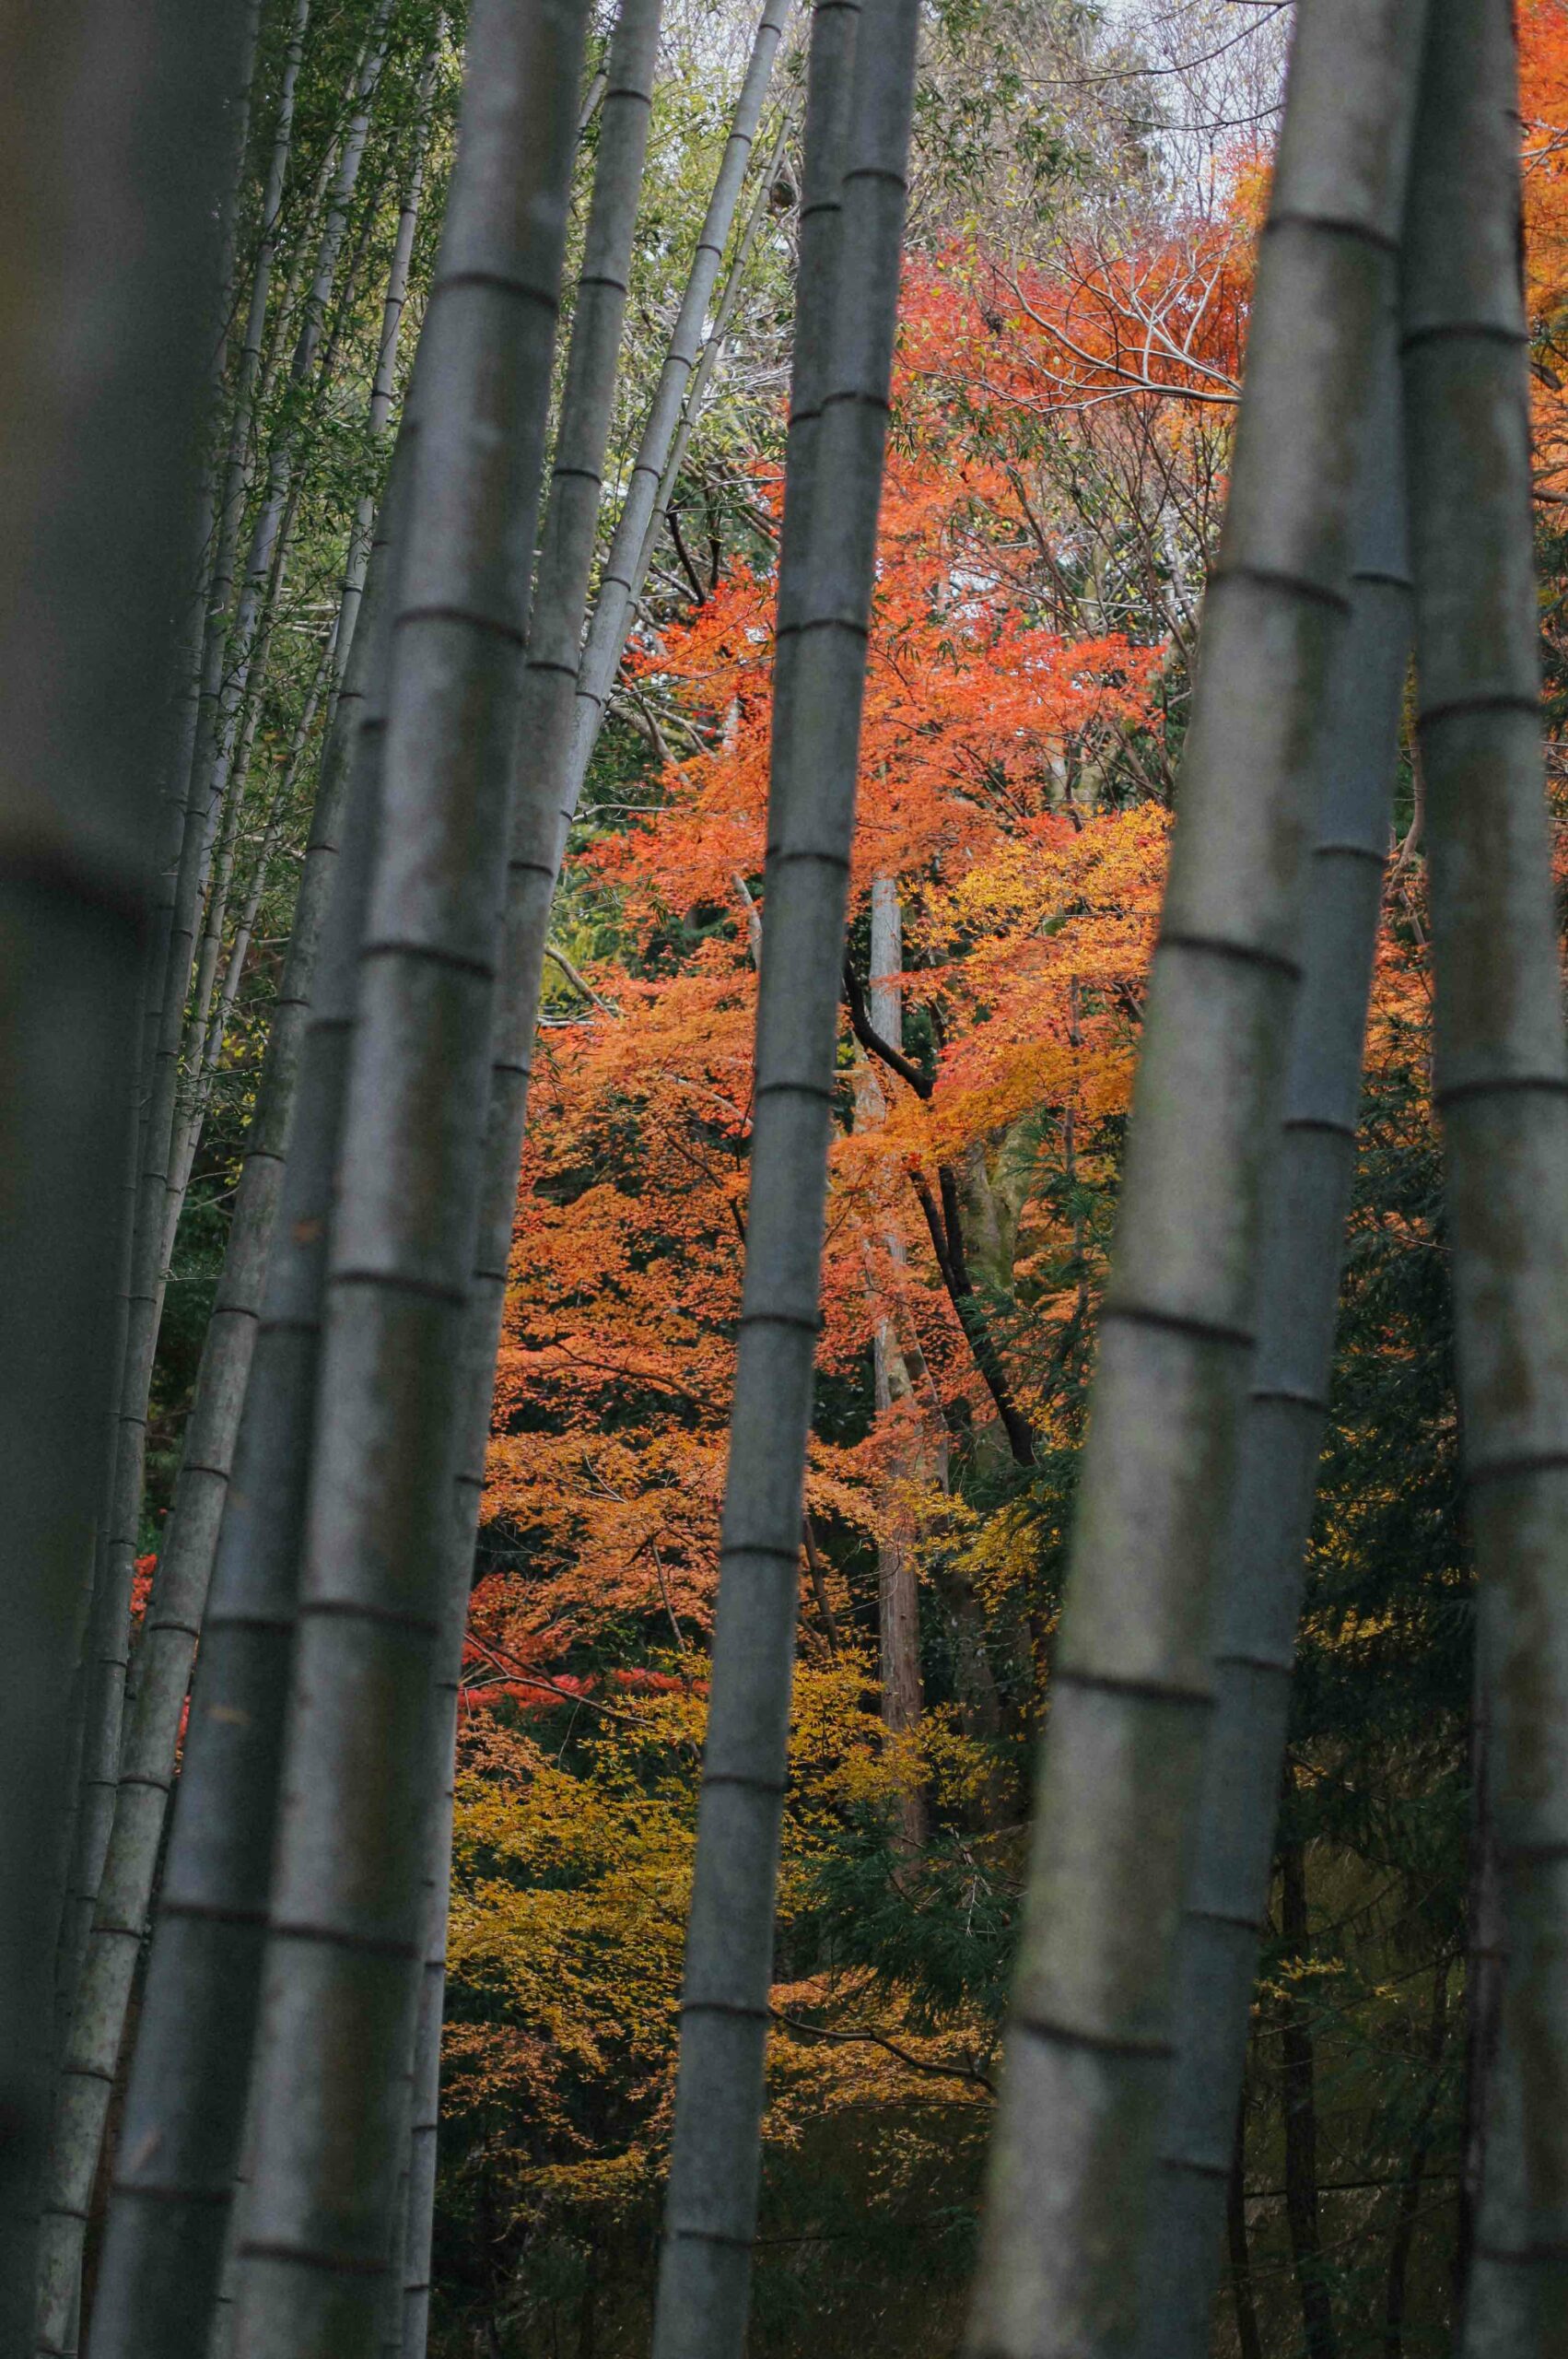 The site is home to a bamboo grove which looks out onto a cliff planted with tall maple trees.